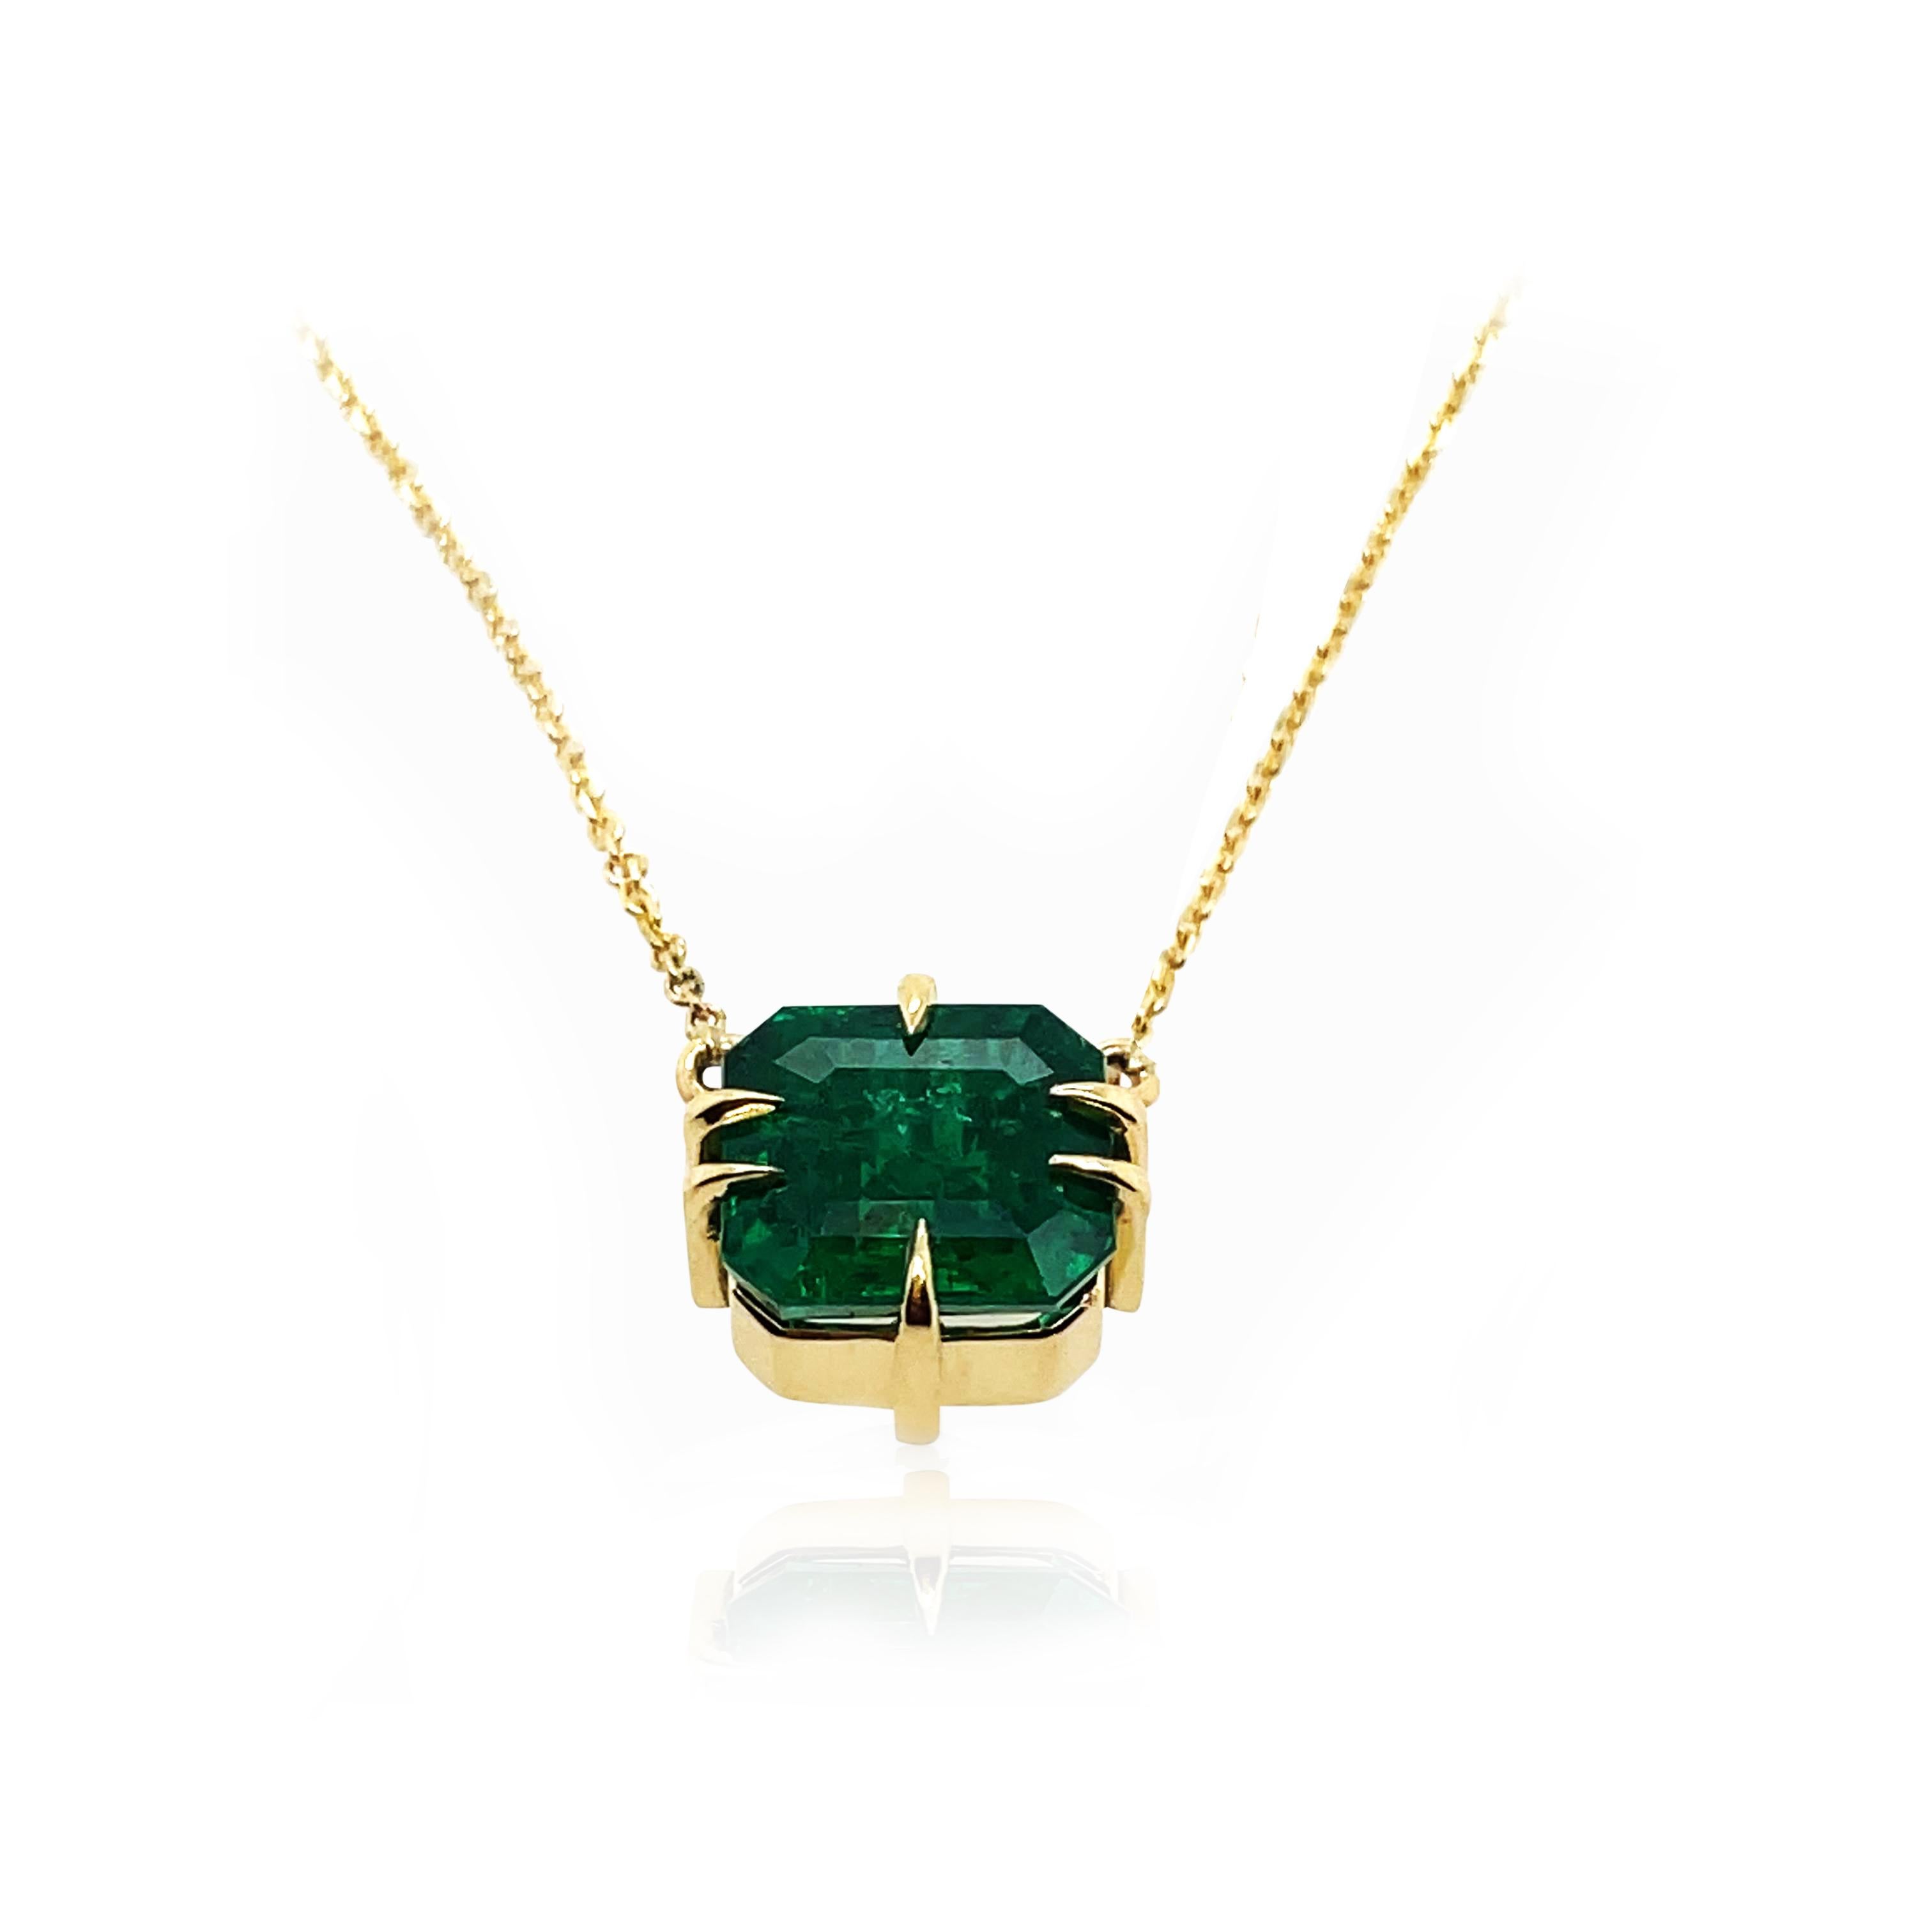 2.26ct Emerald necklace made in 18k yellow gold with chain  7